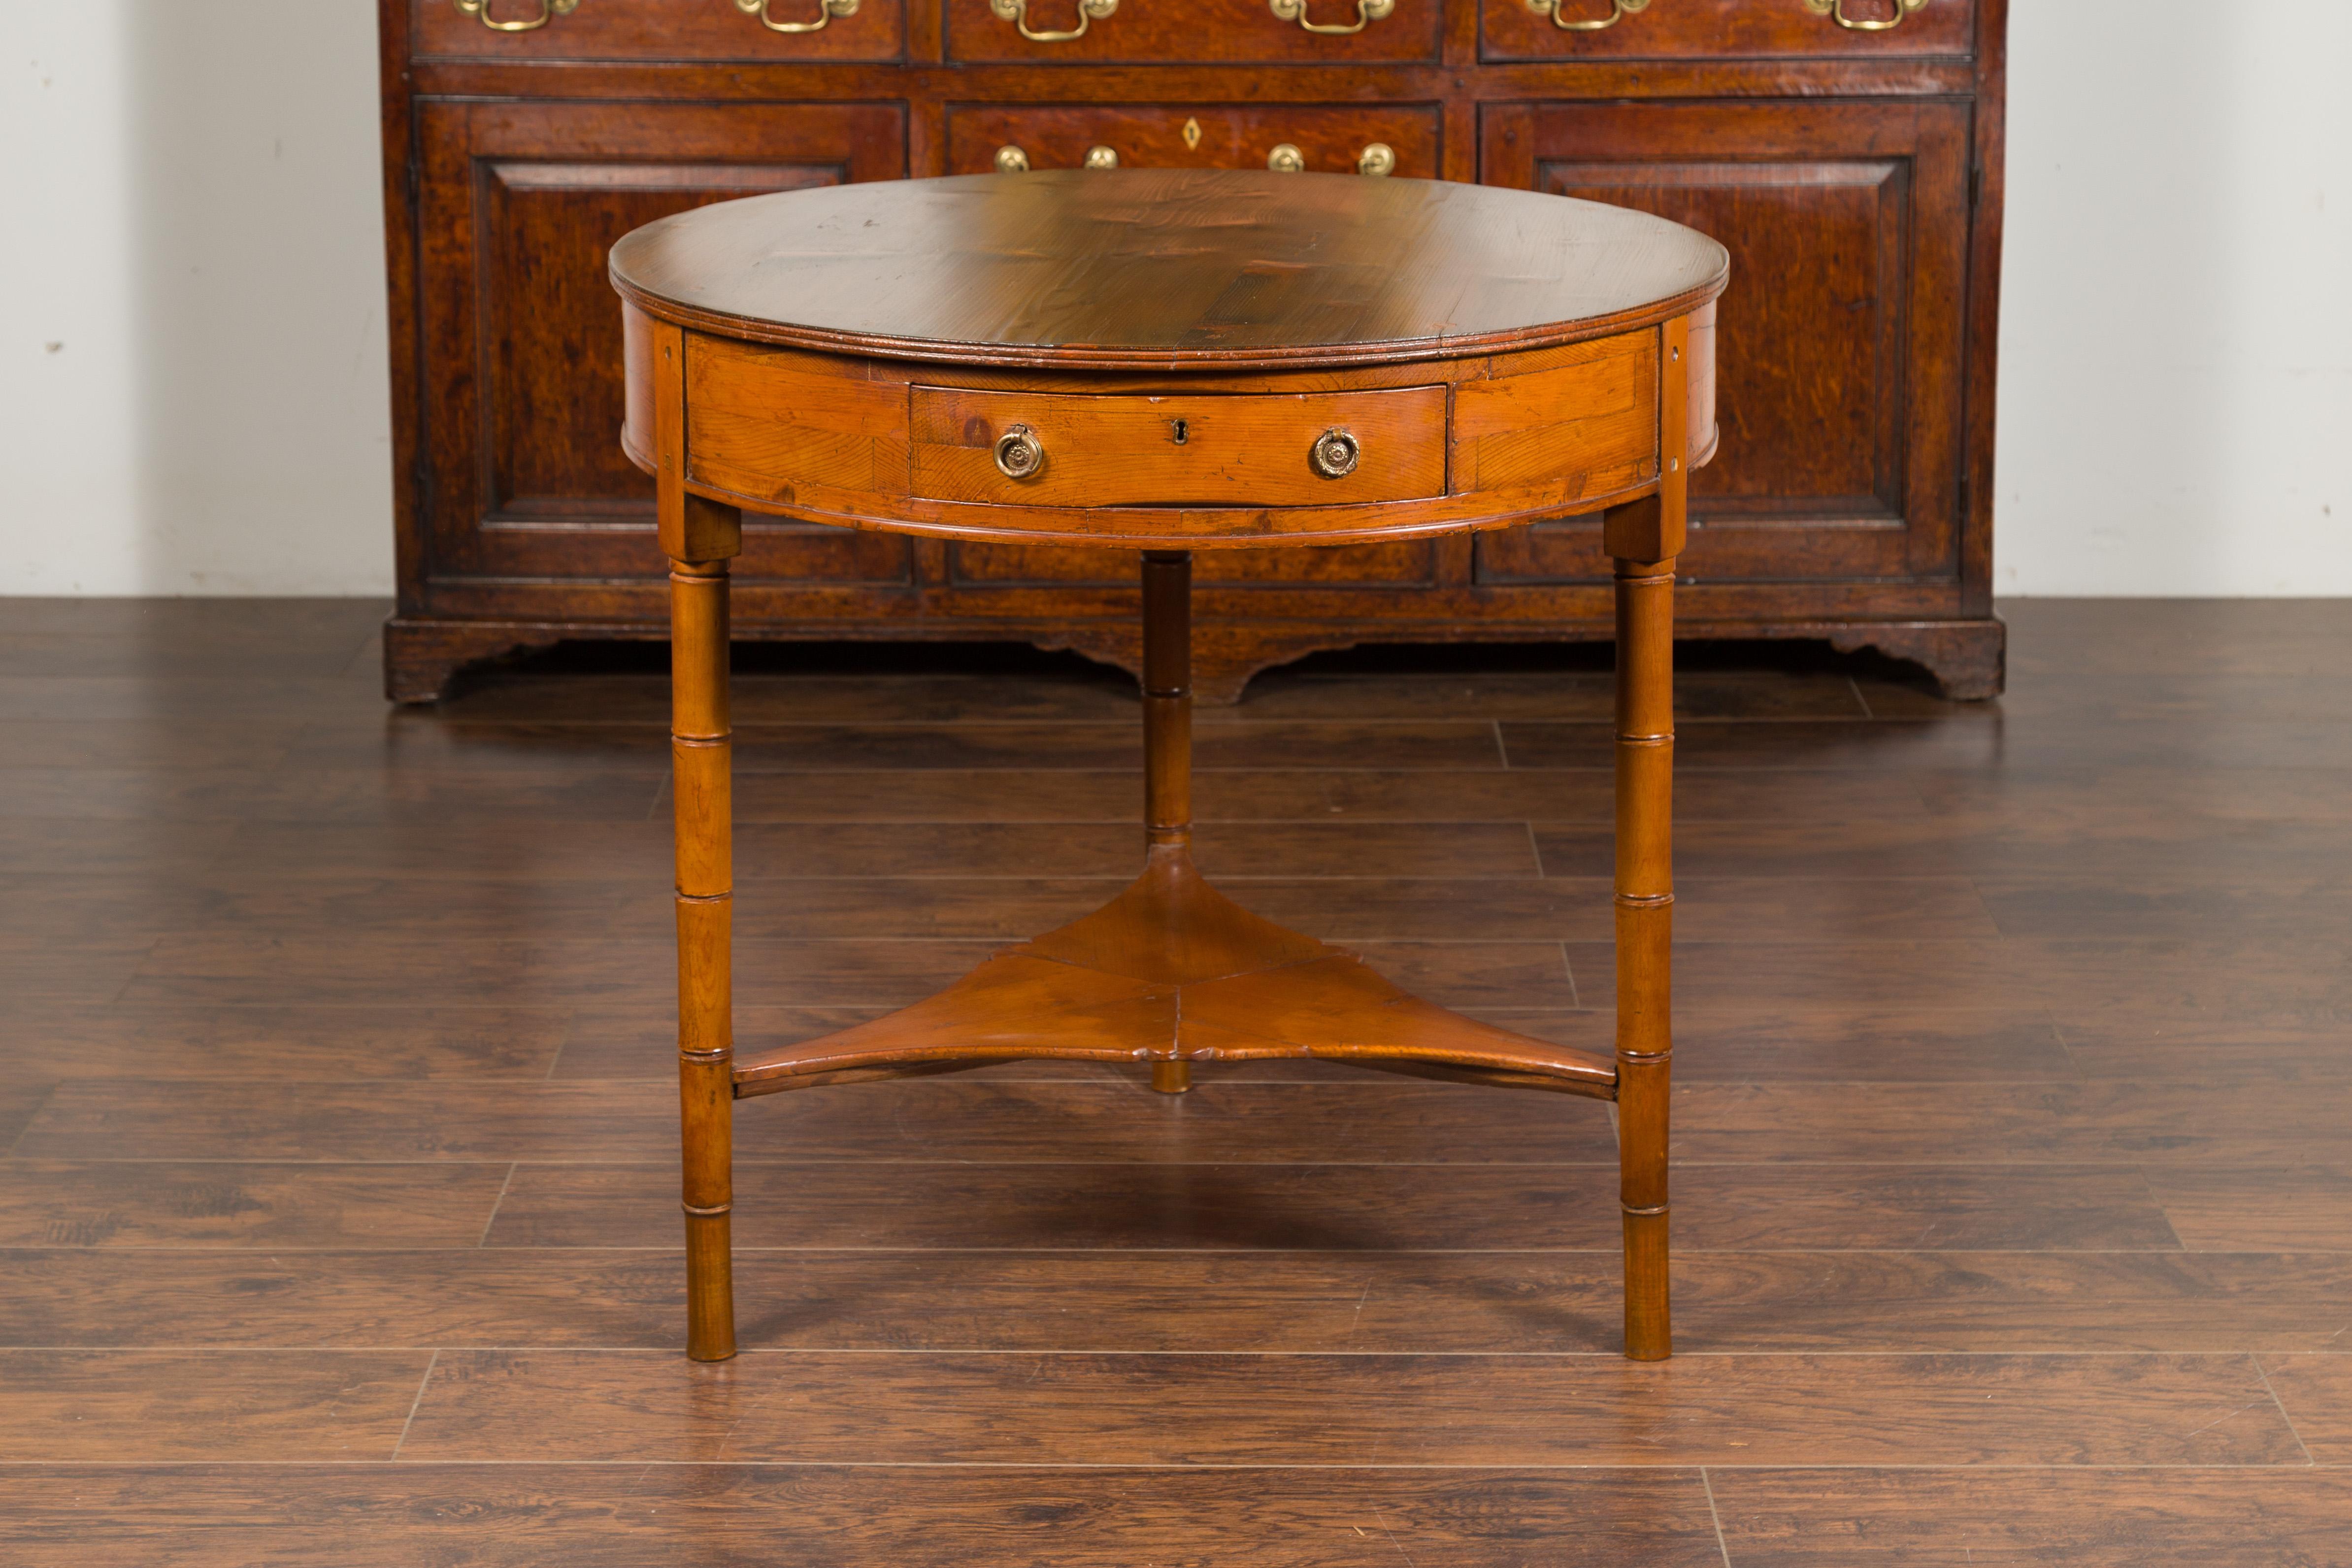 An English pine center table from the mid-19th century, with partitioned drawer, faux bamboo legs and triangular shelf. Created in England during the last third of the 19th century, this center table features a circular top resting above a single